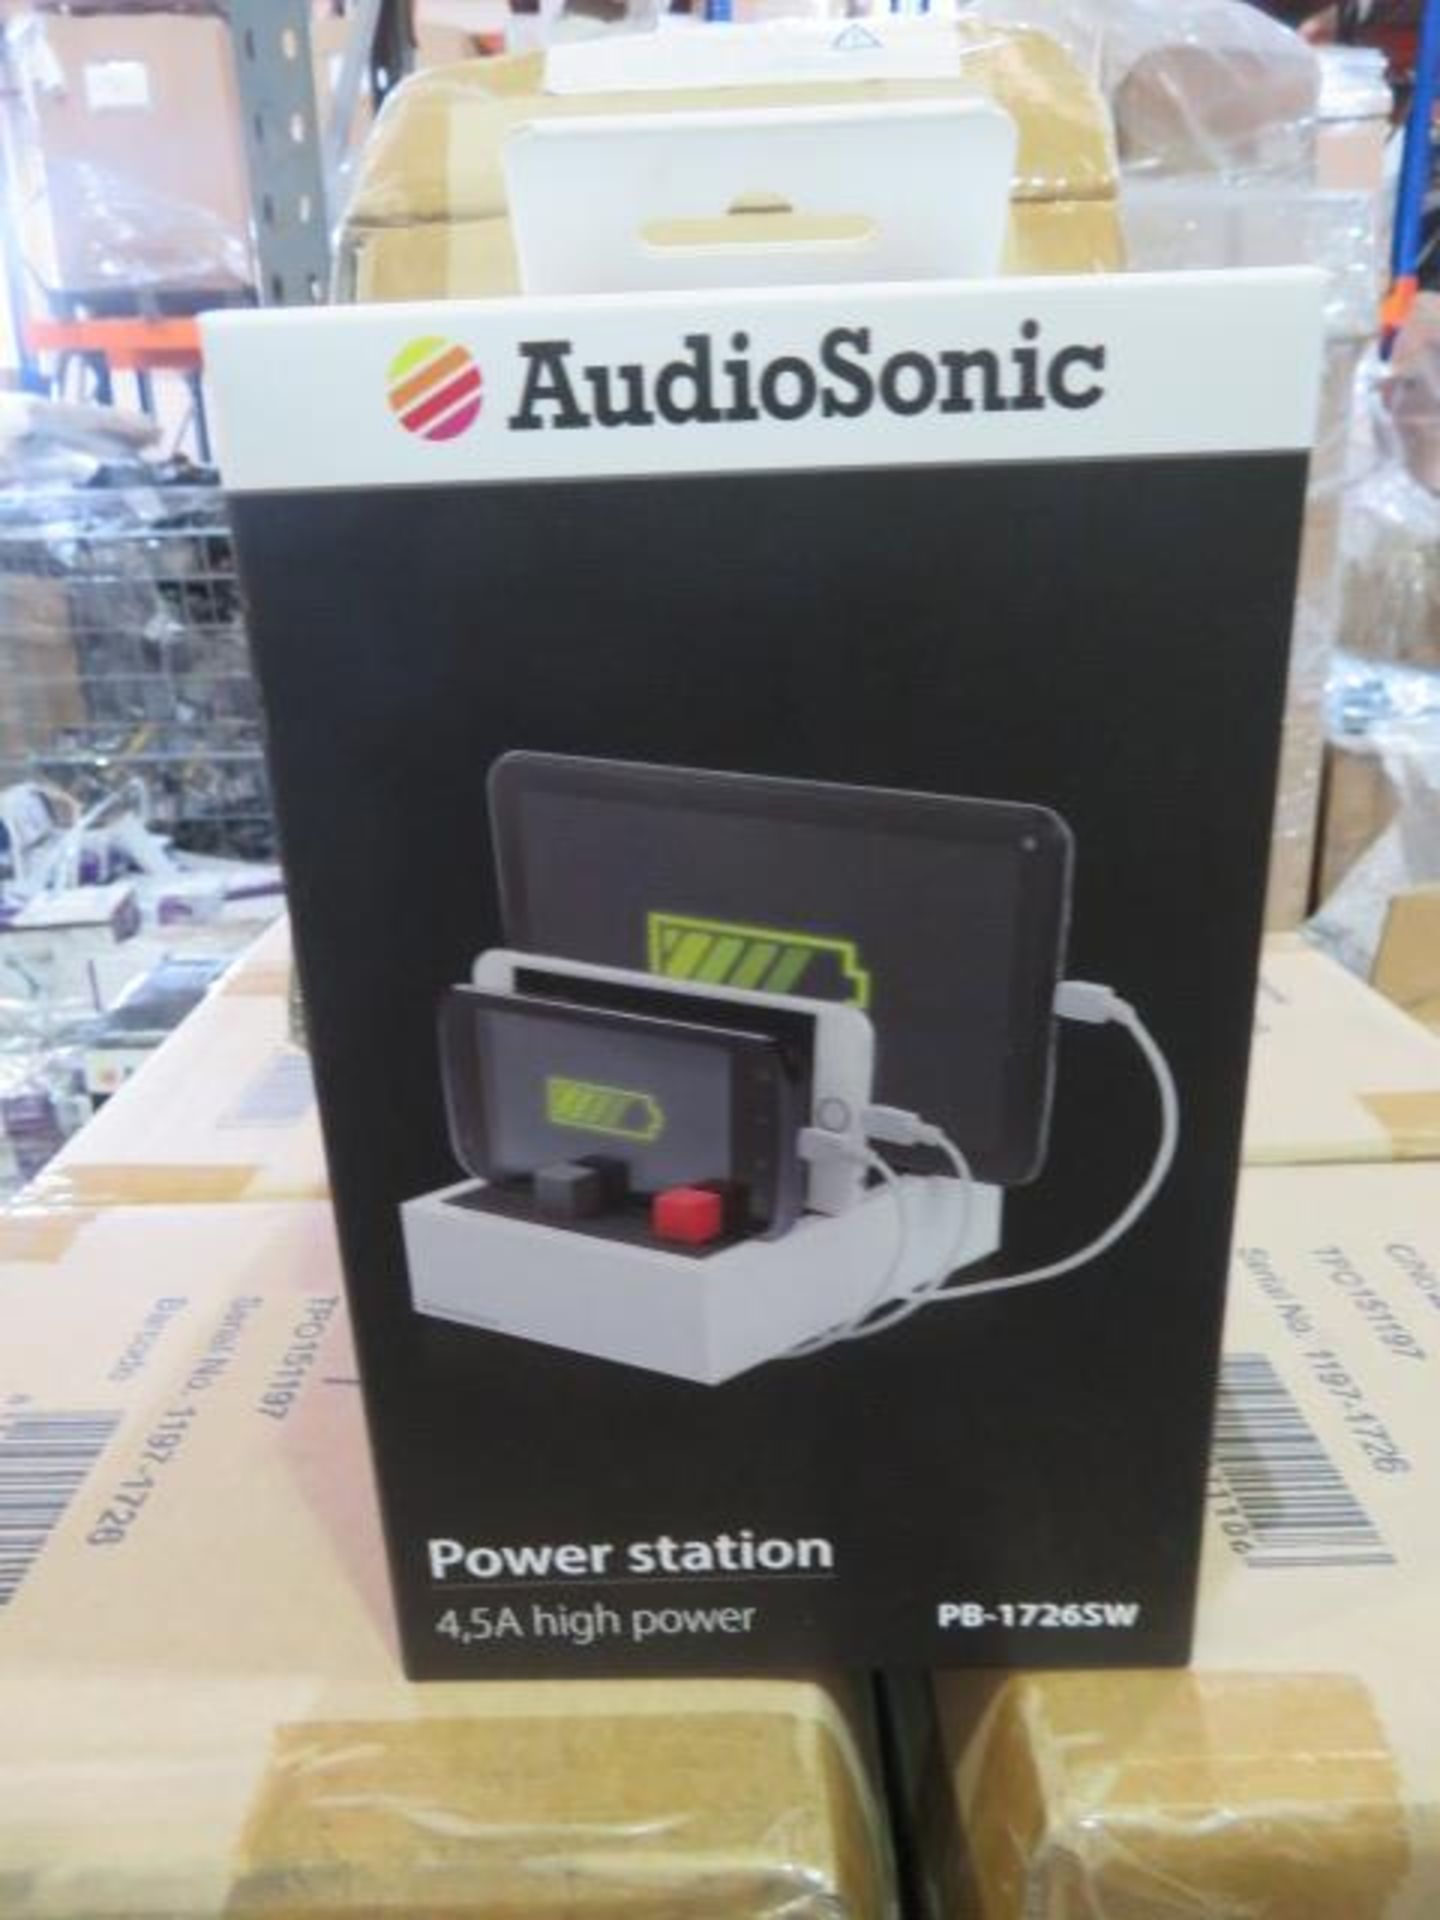 10 X New & Boxed Audio Sonic 4,5A High Power - Power Station. Smart Compatibility - Auto Adapts...